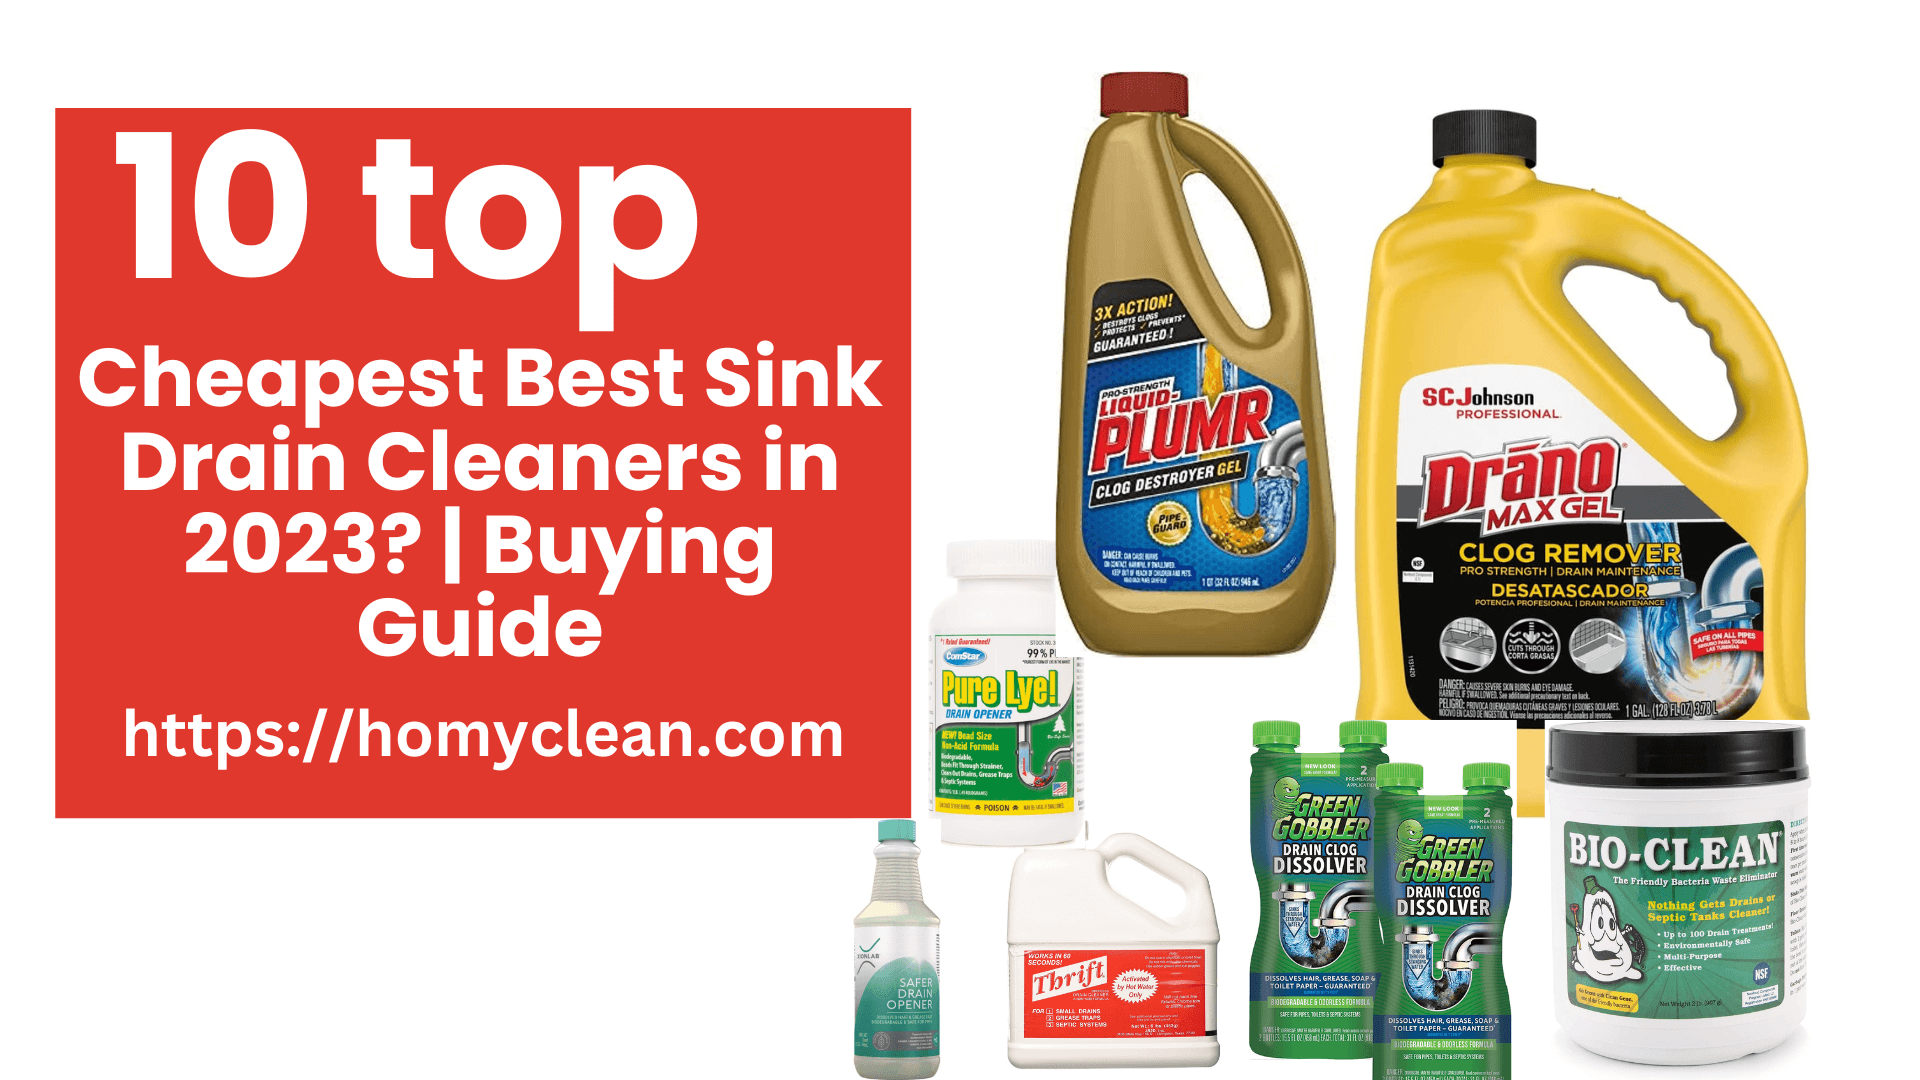 Best Sink Drain Cleaners